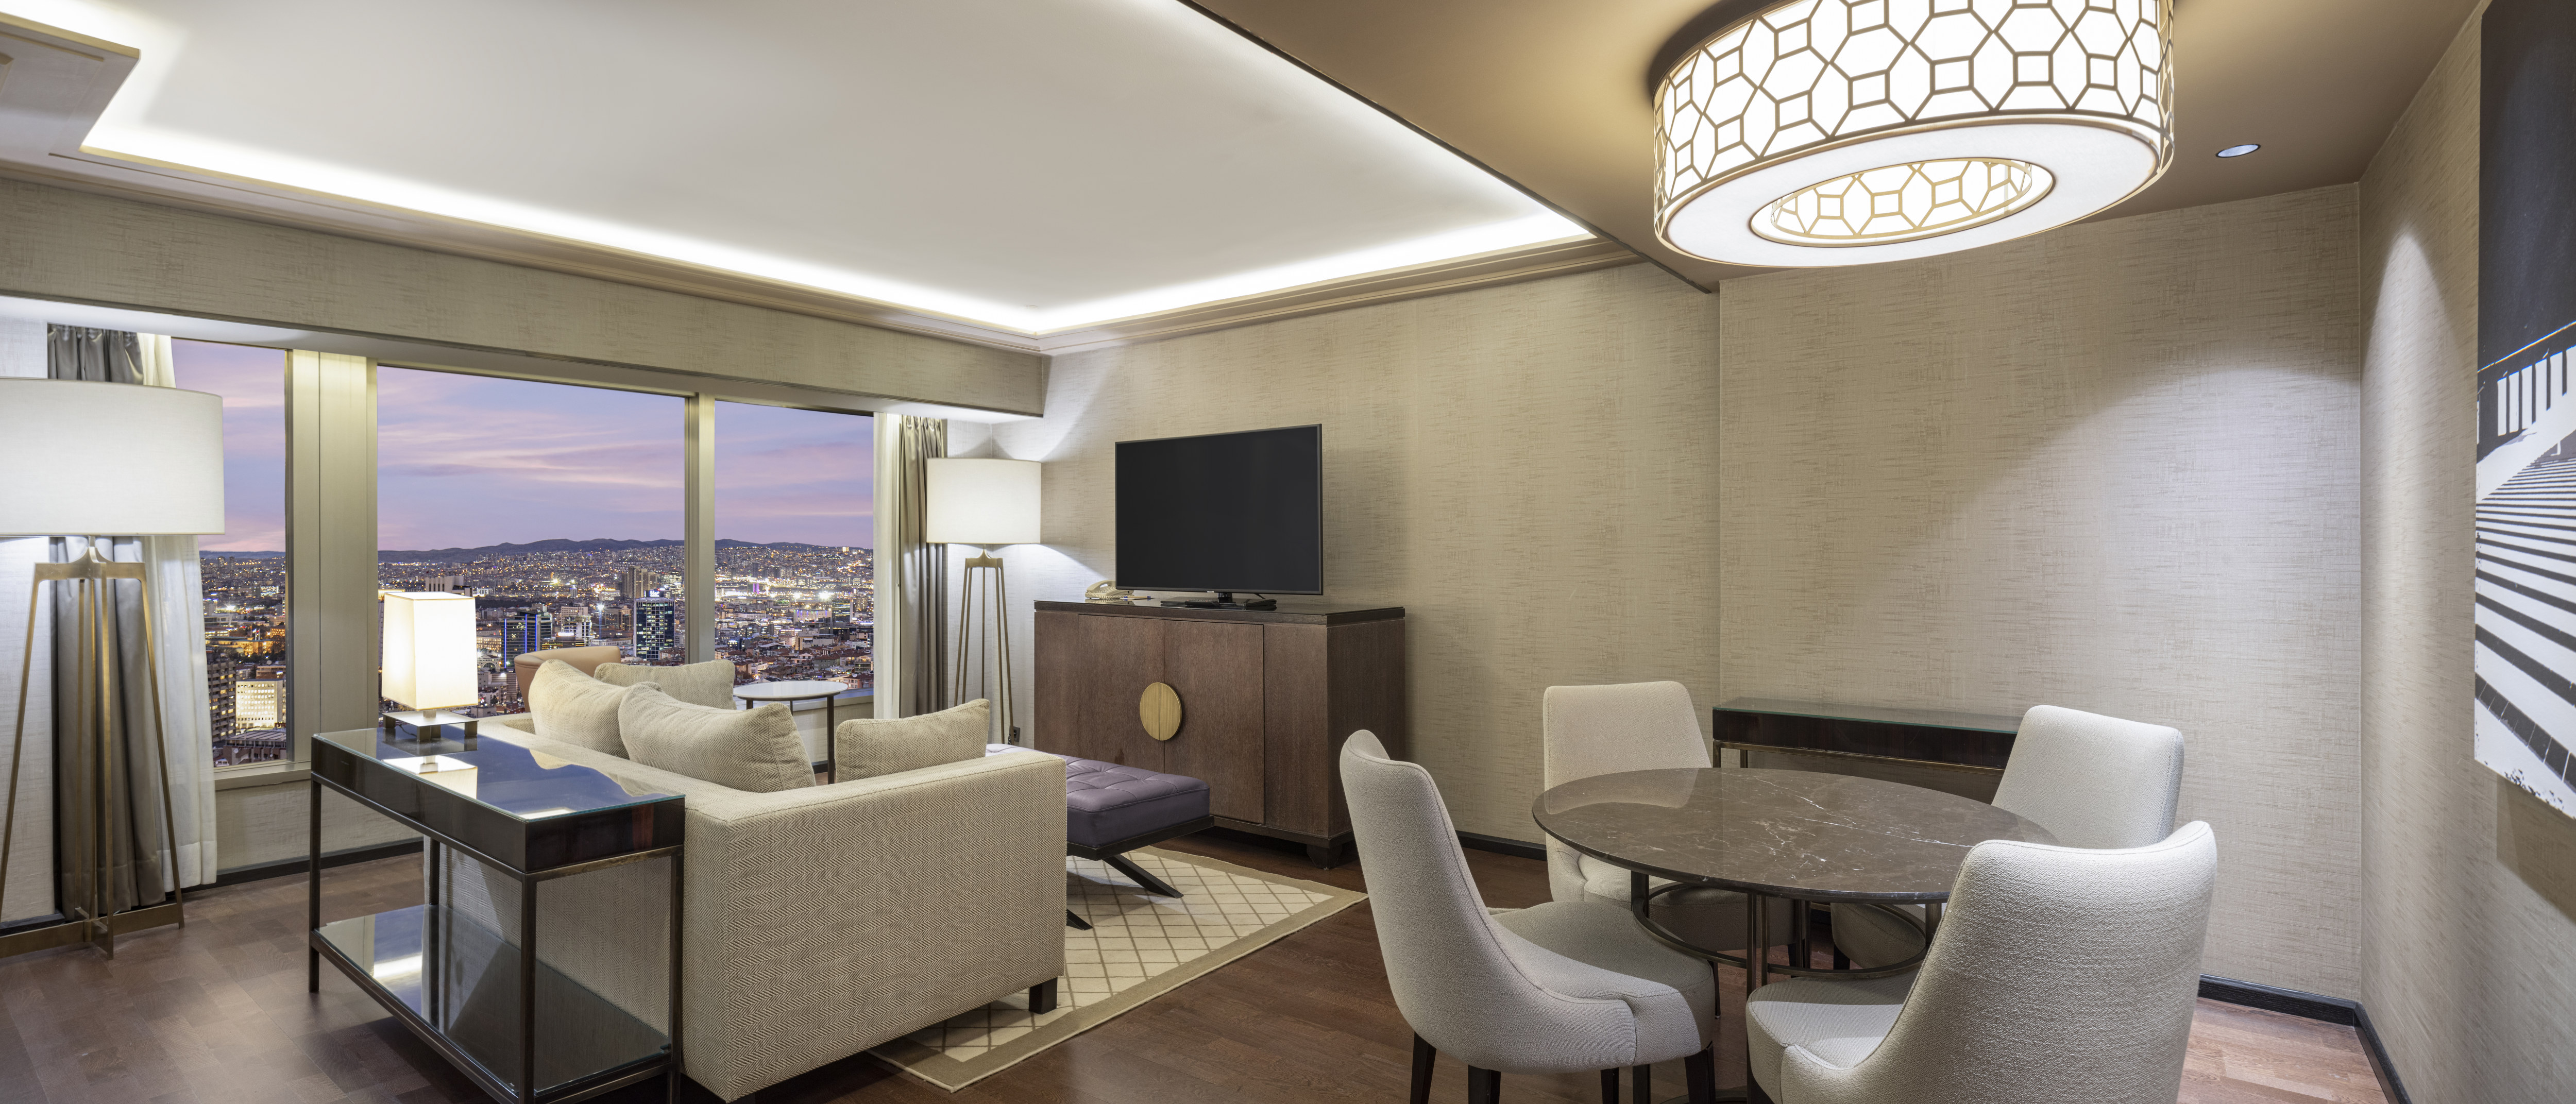 Suite Living Room with Large Windows and City View